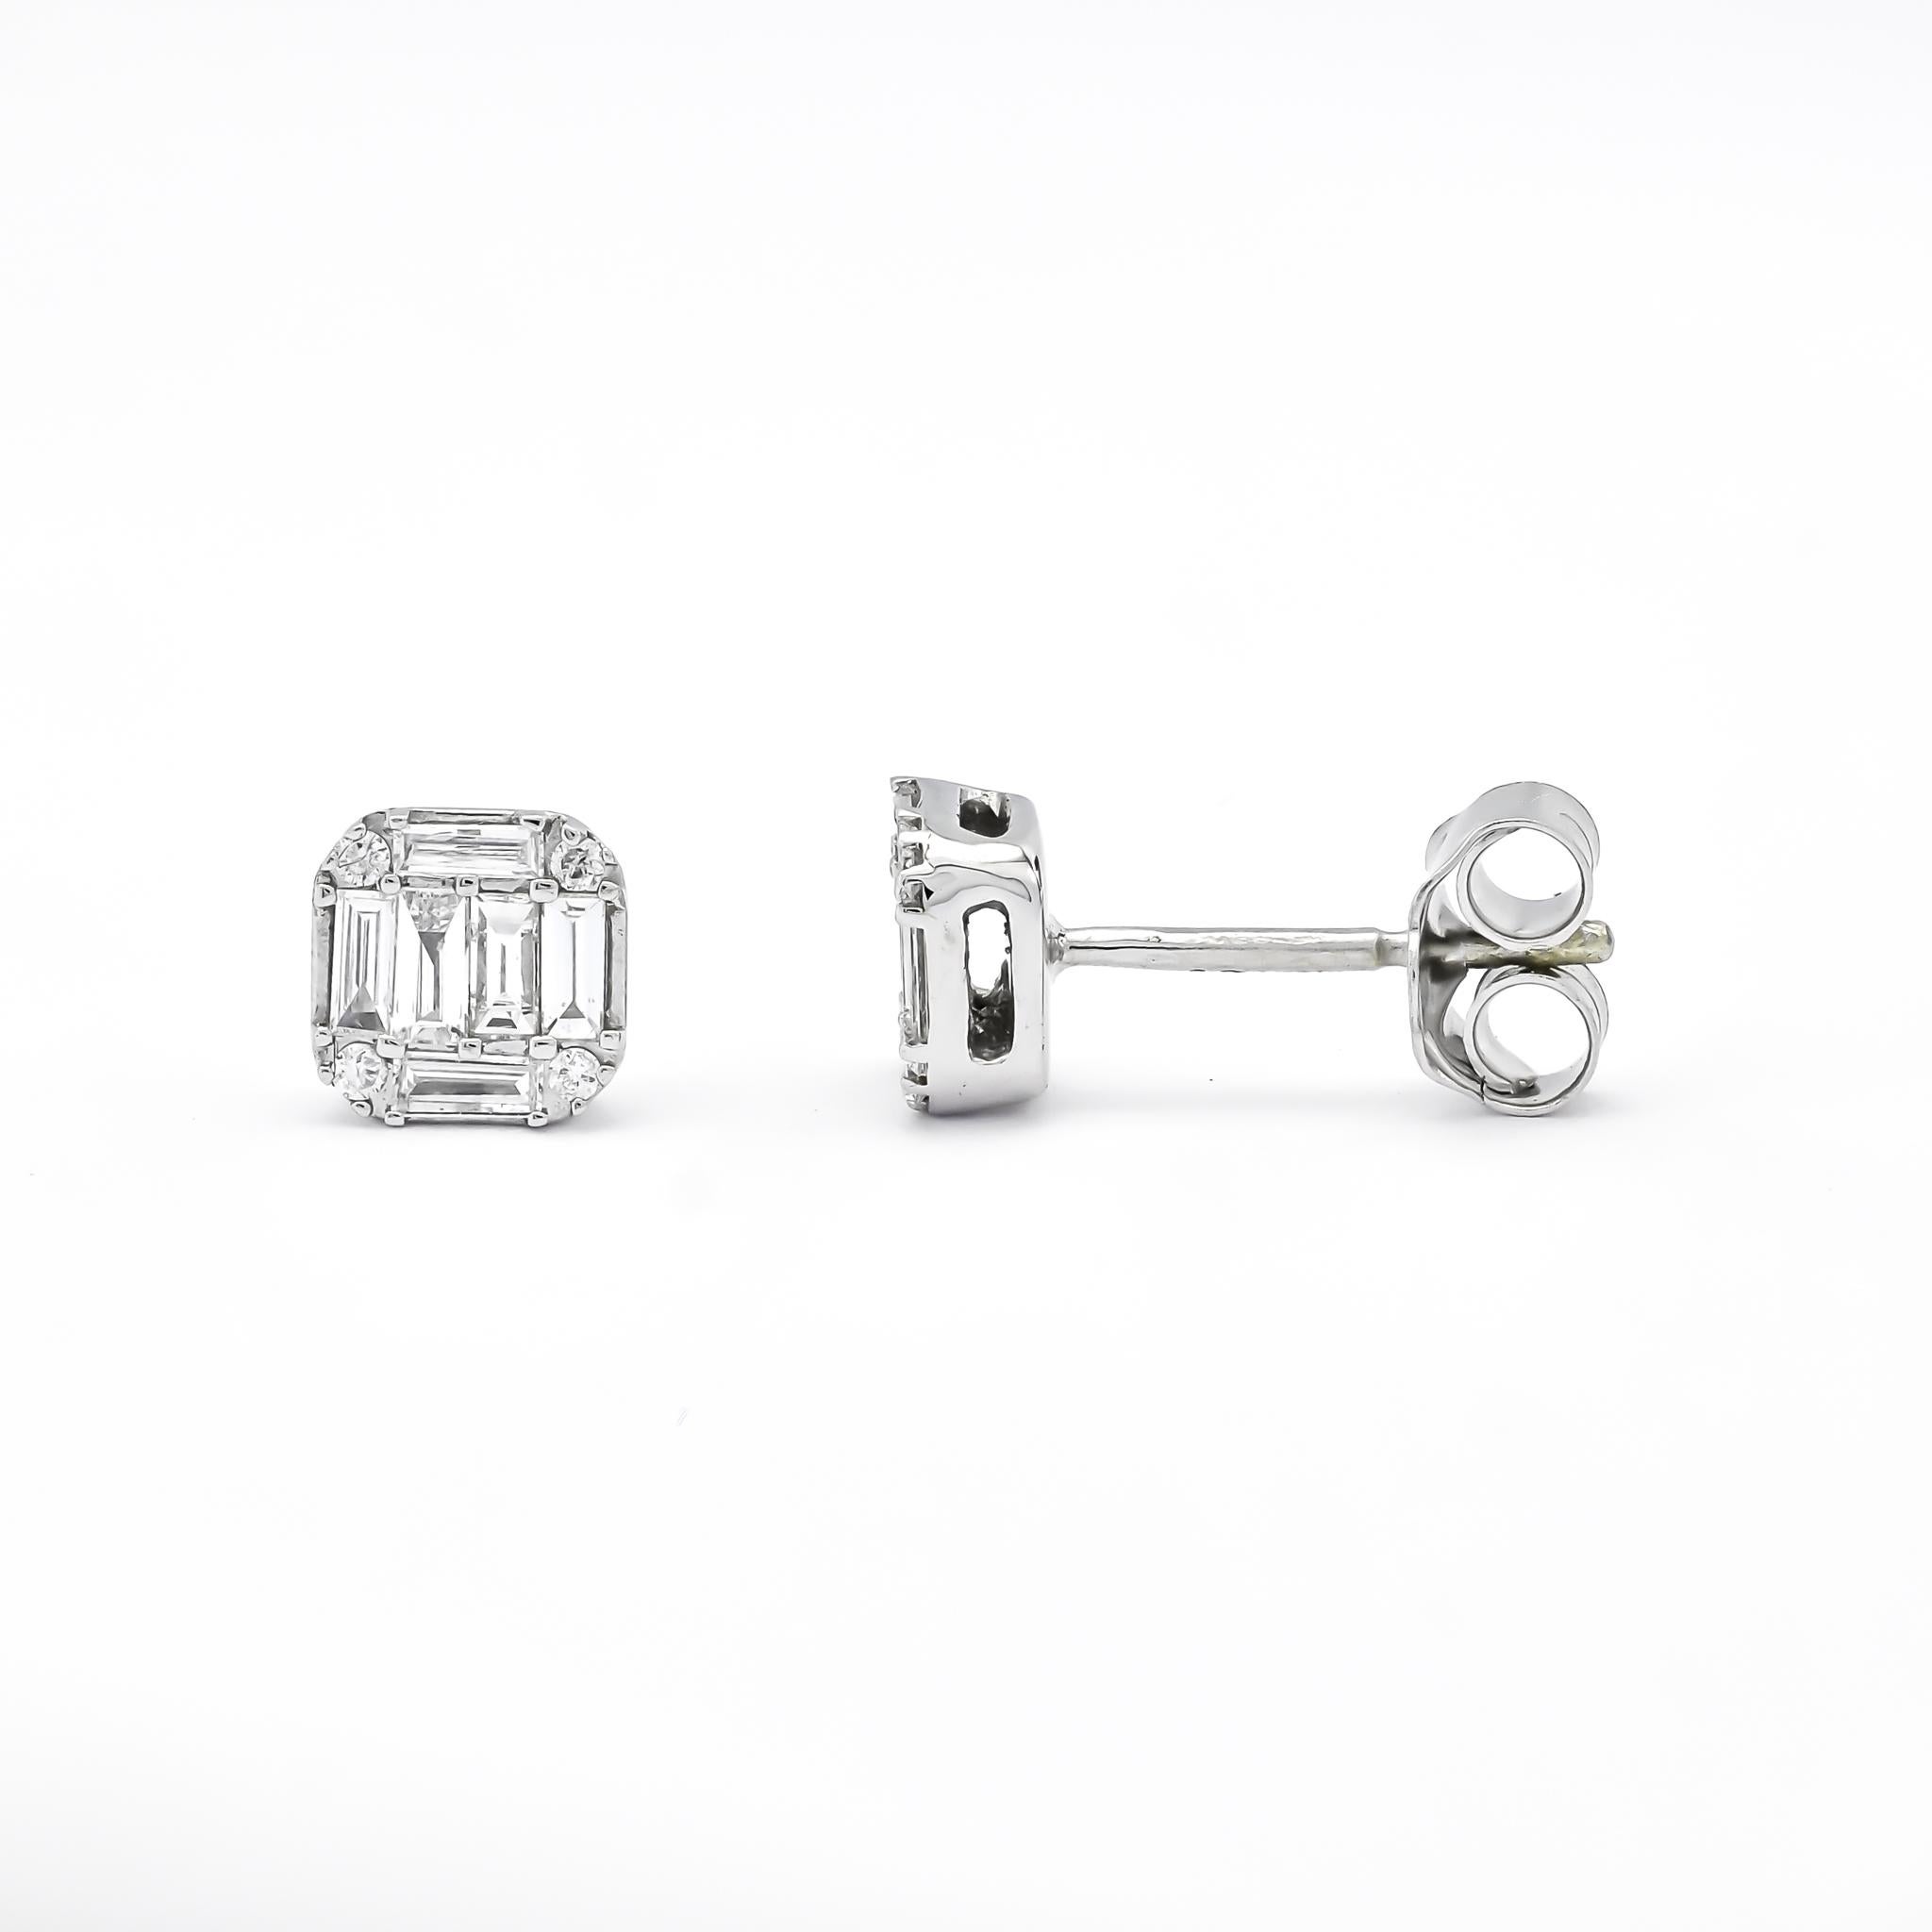  Natural Diamonds 0.25 Cts with 18KT Yellow Gold Petite Stud Earrings For Sale 1